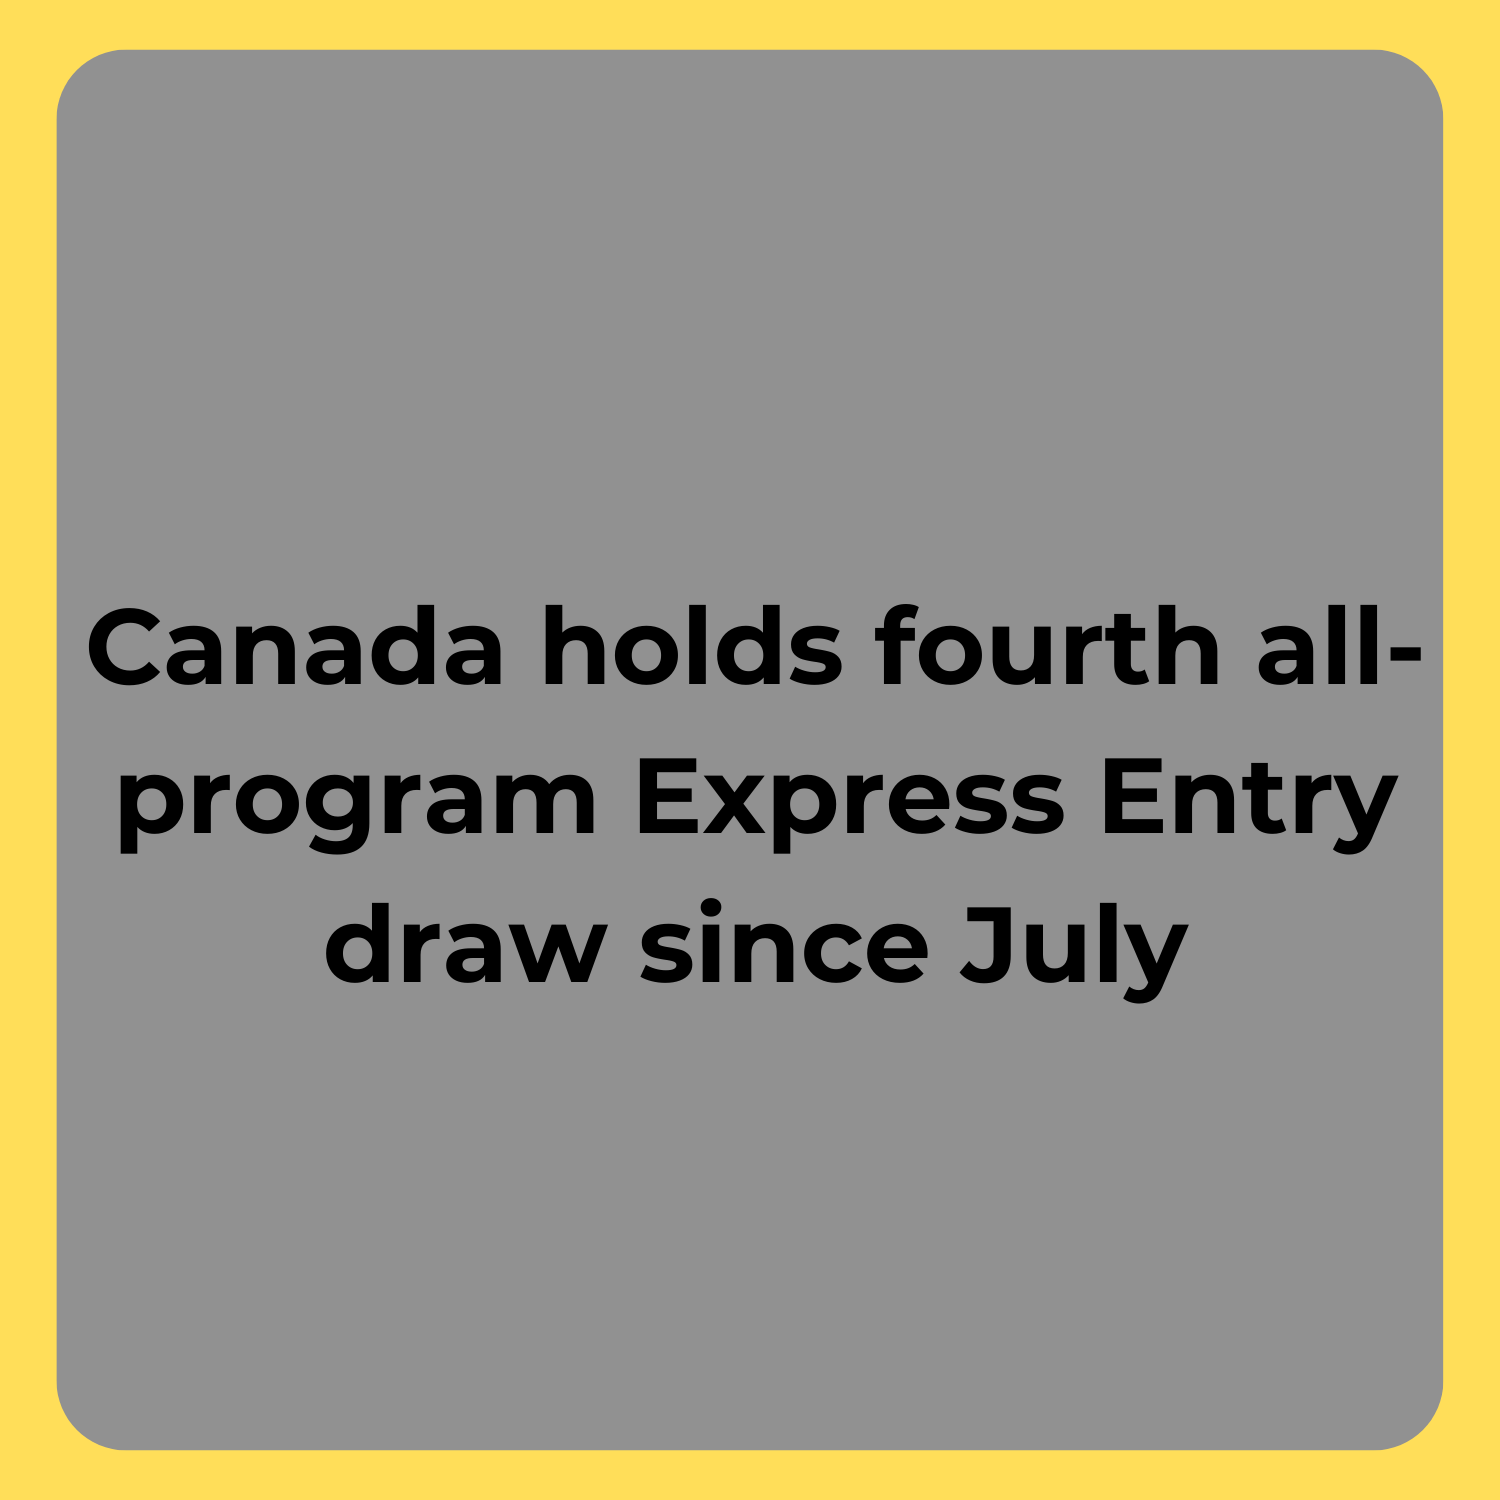 Canada holds fourth all-program Express Entry draw since July